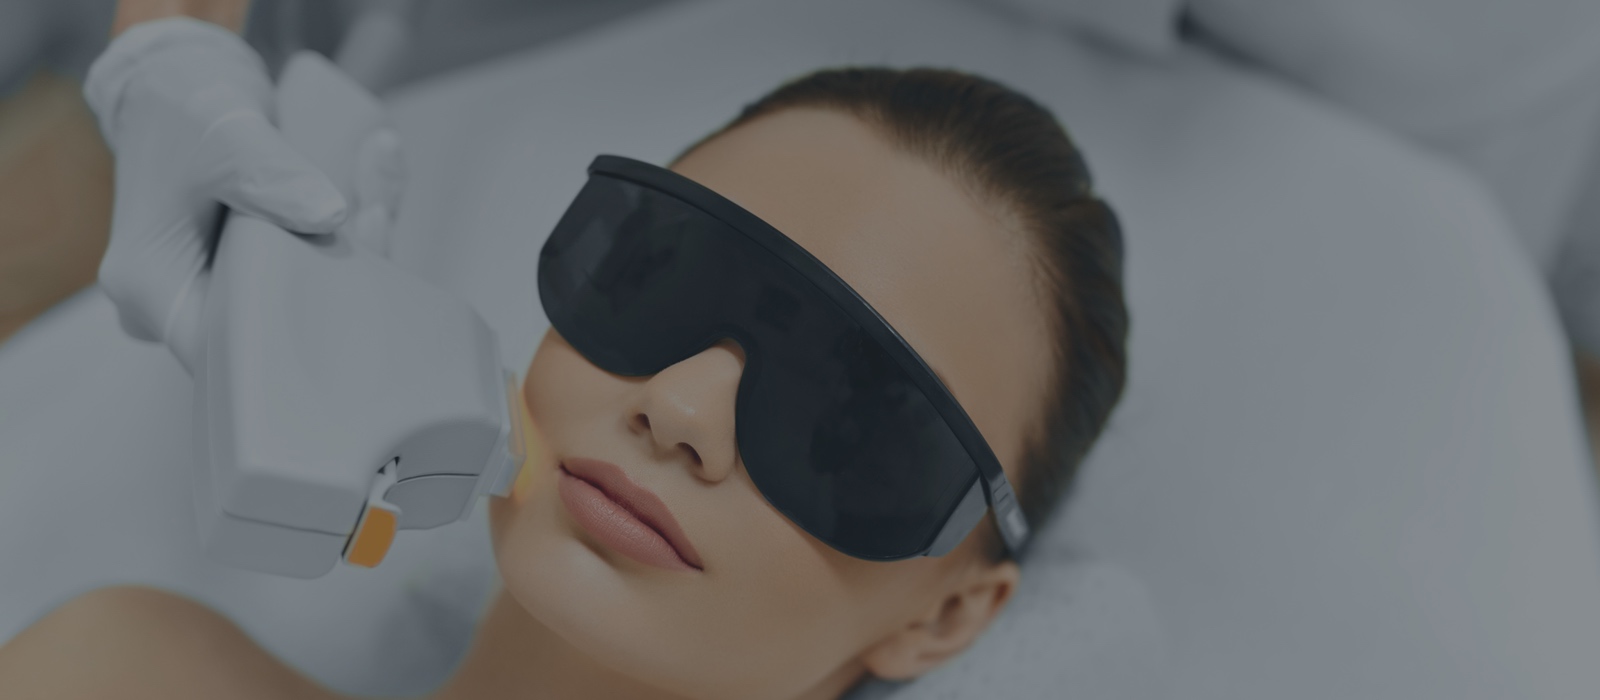 IPL Therapy and Chemical Peels: What to Expect When Treating Your Skin